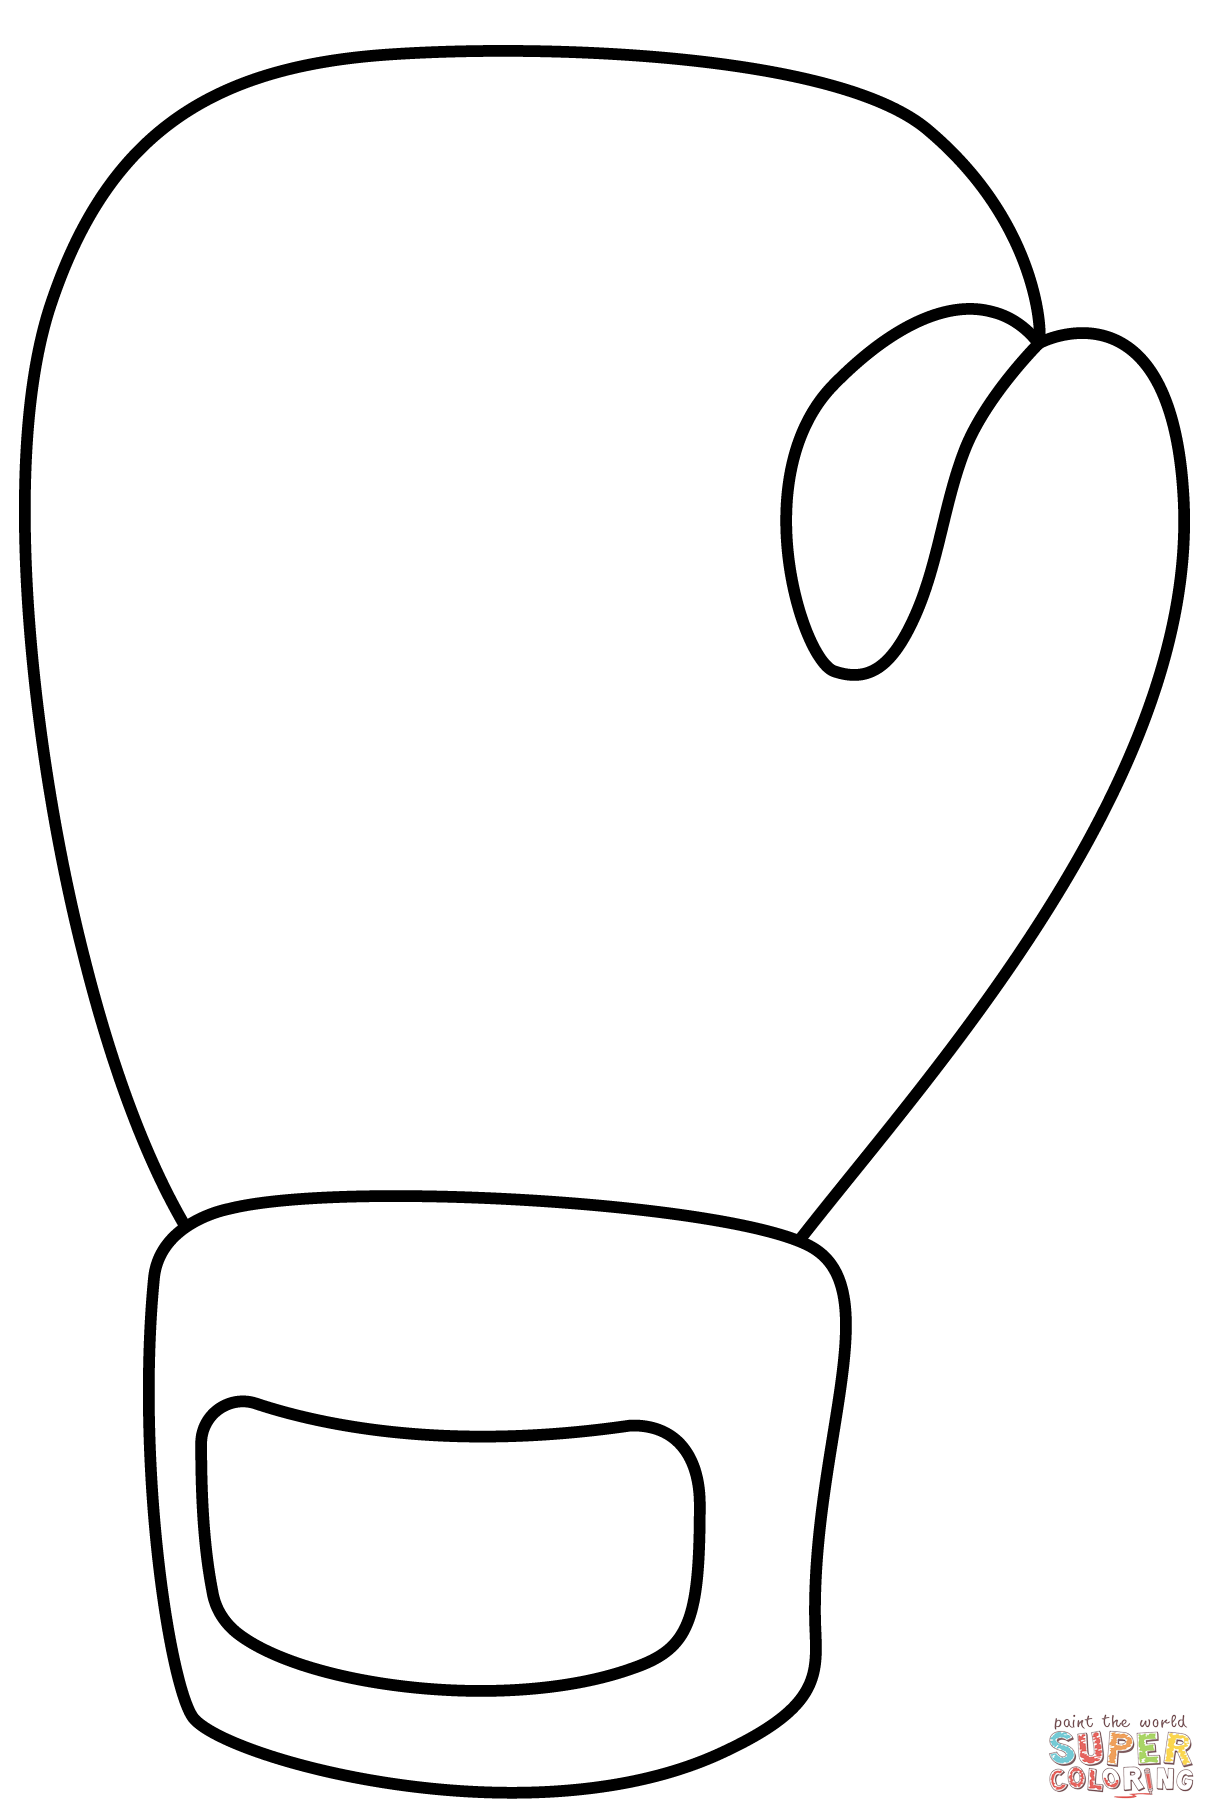 Boxing glove emoji coloring page free printable coloring pages